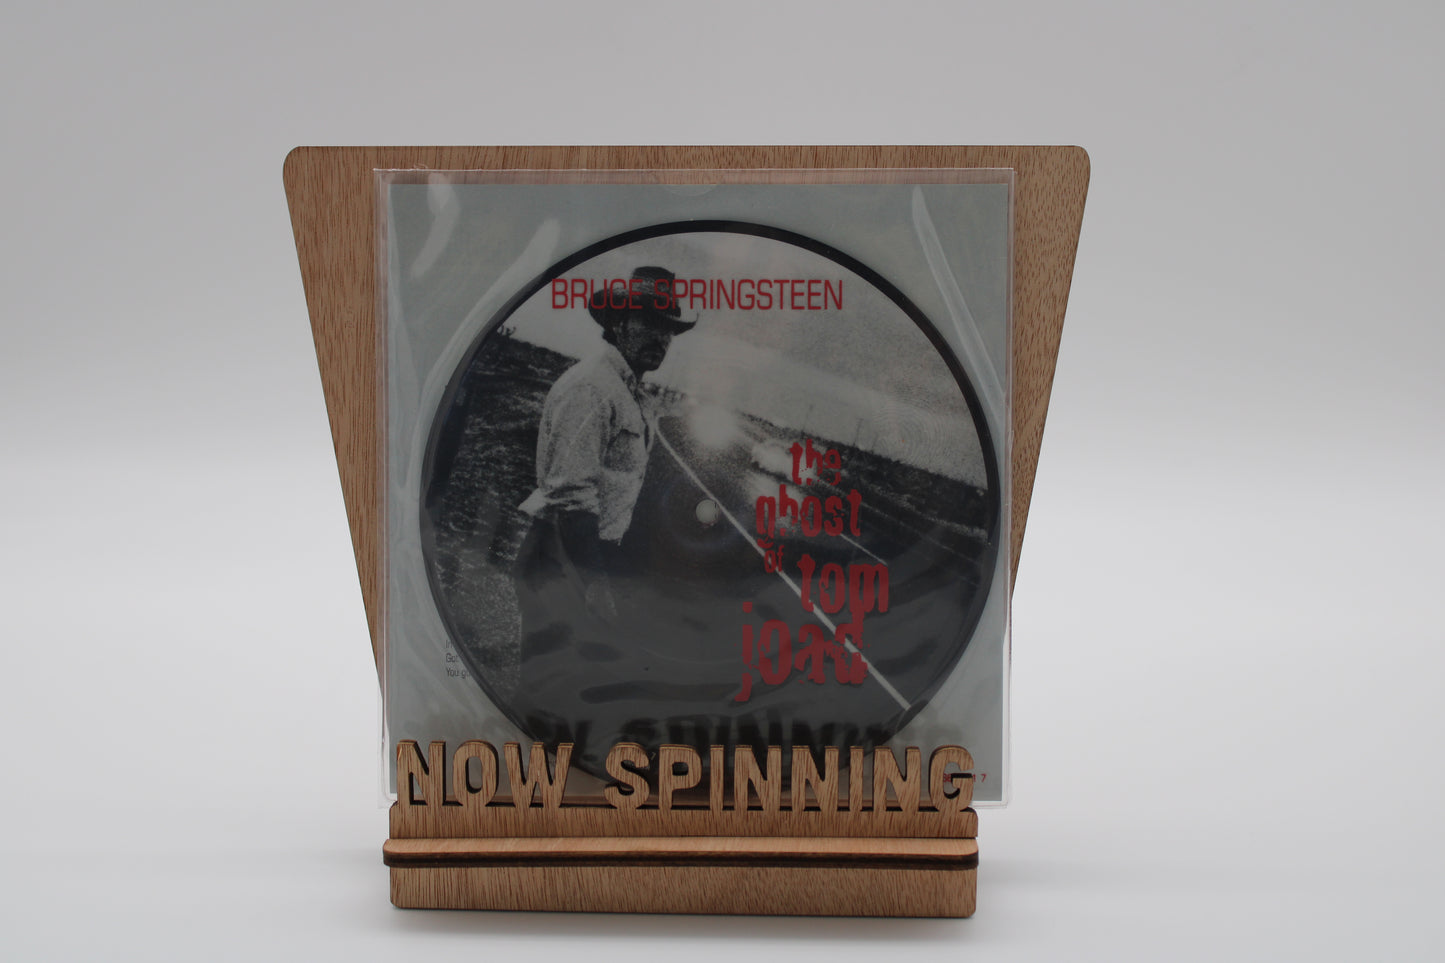 Bruce Springsteen 7" Picture Disc Vinyl Collectible Ltd. Ed. & Numbered - Ghost of Tom Joad